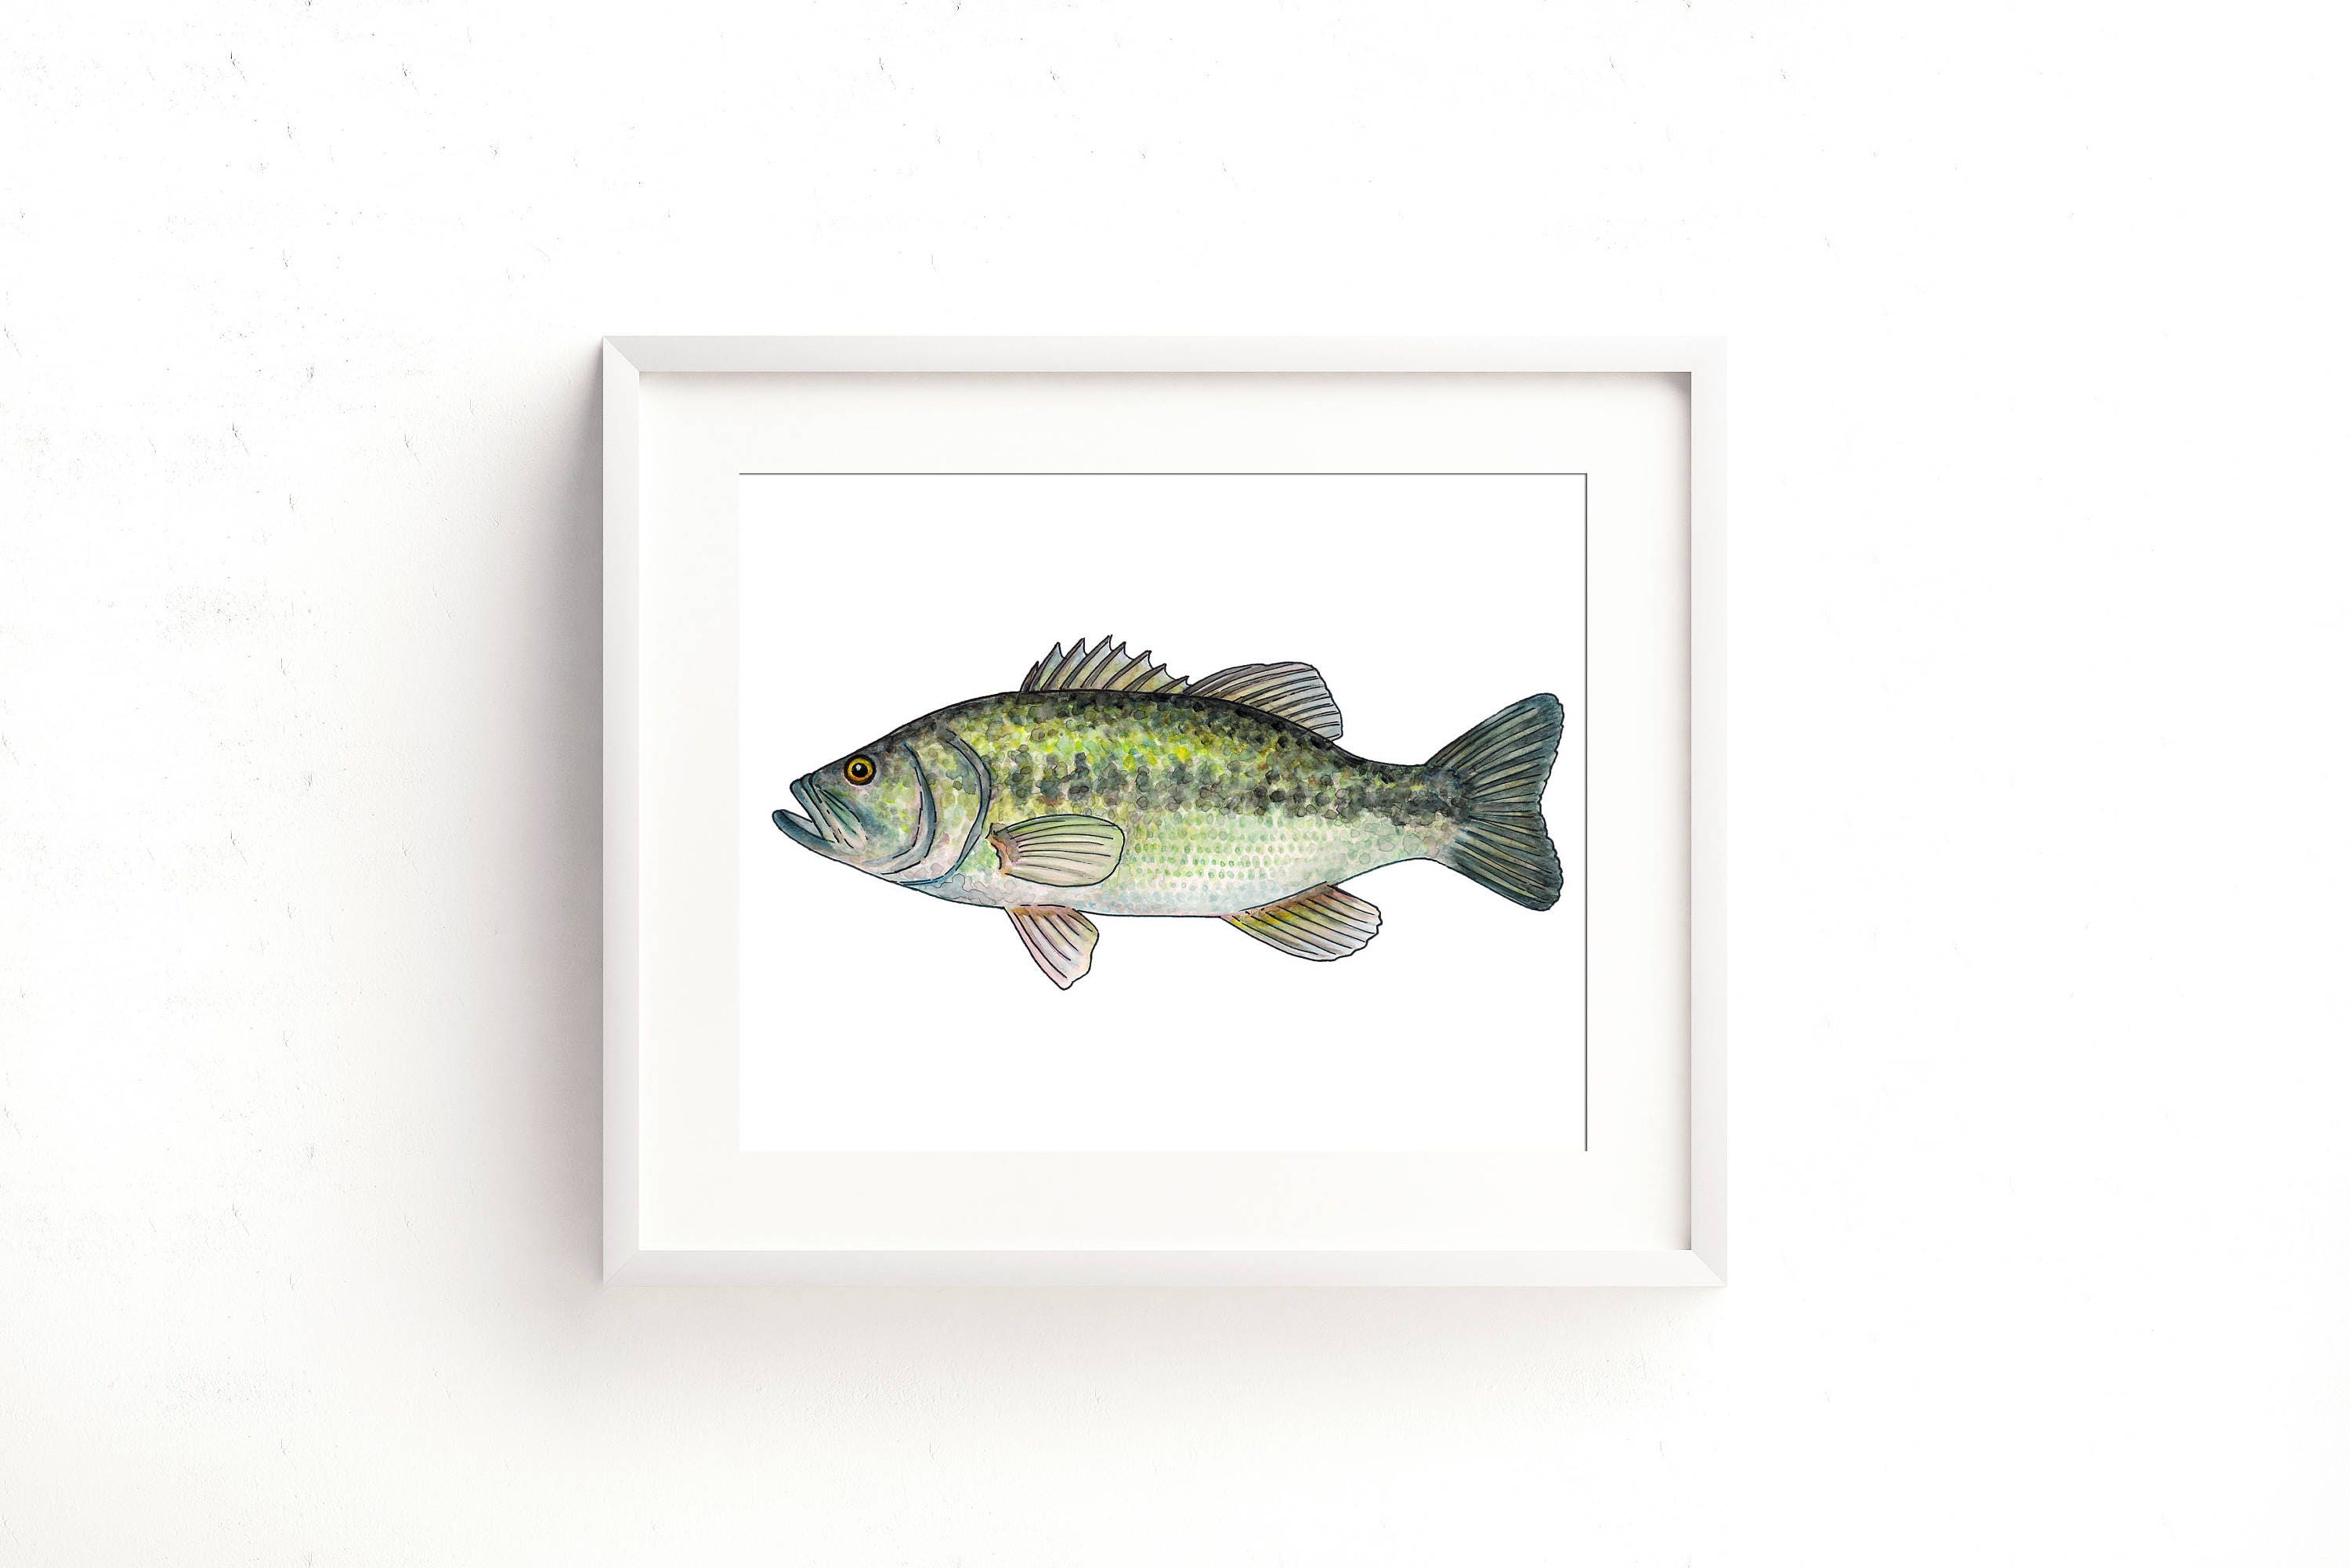 The home in 50 objects from around the world #23: Big Mouth Billy Bass